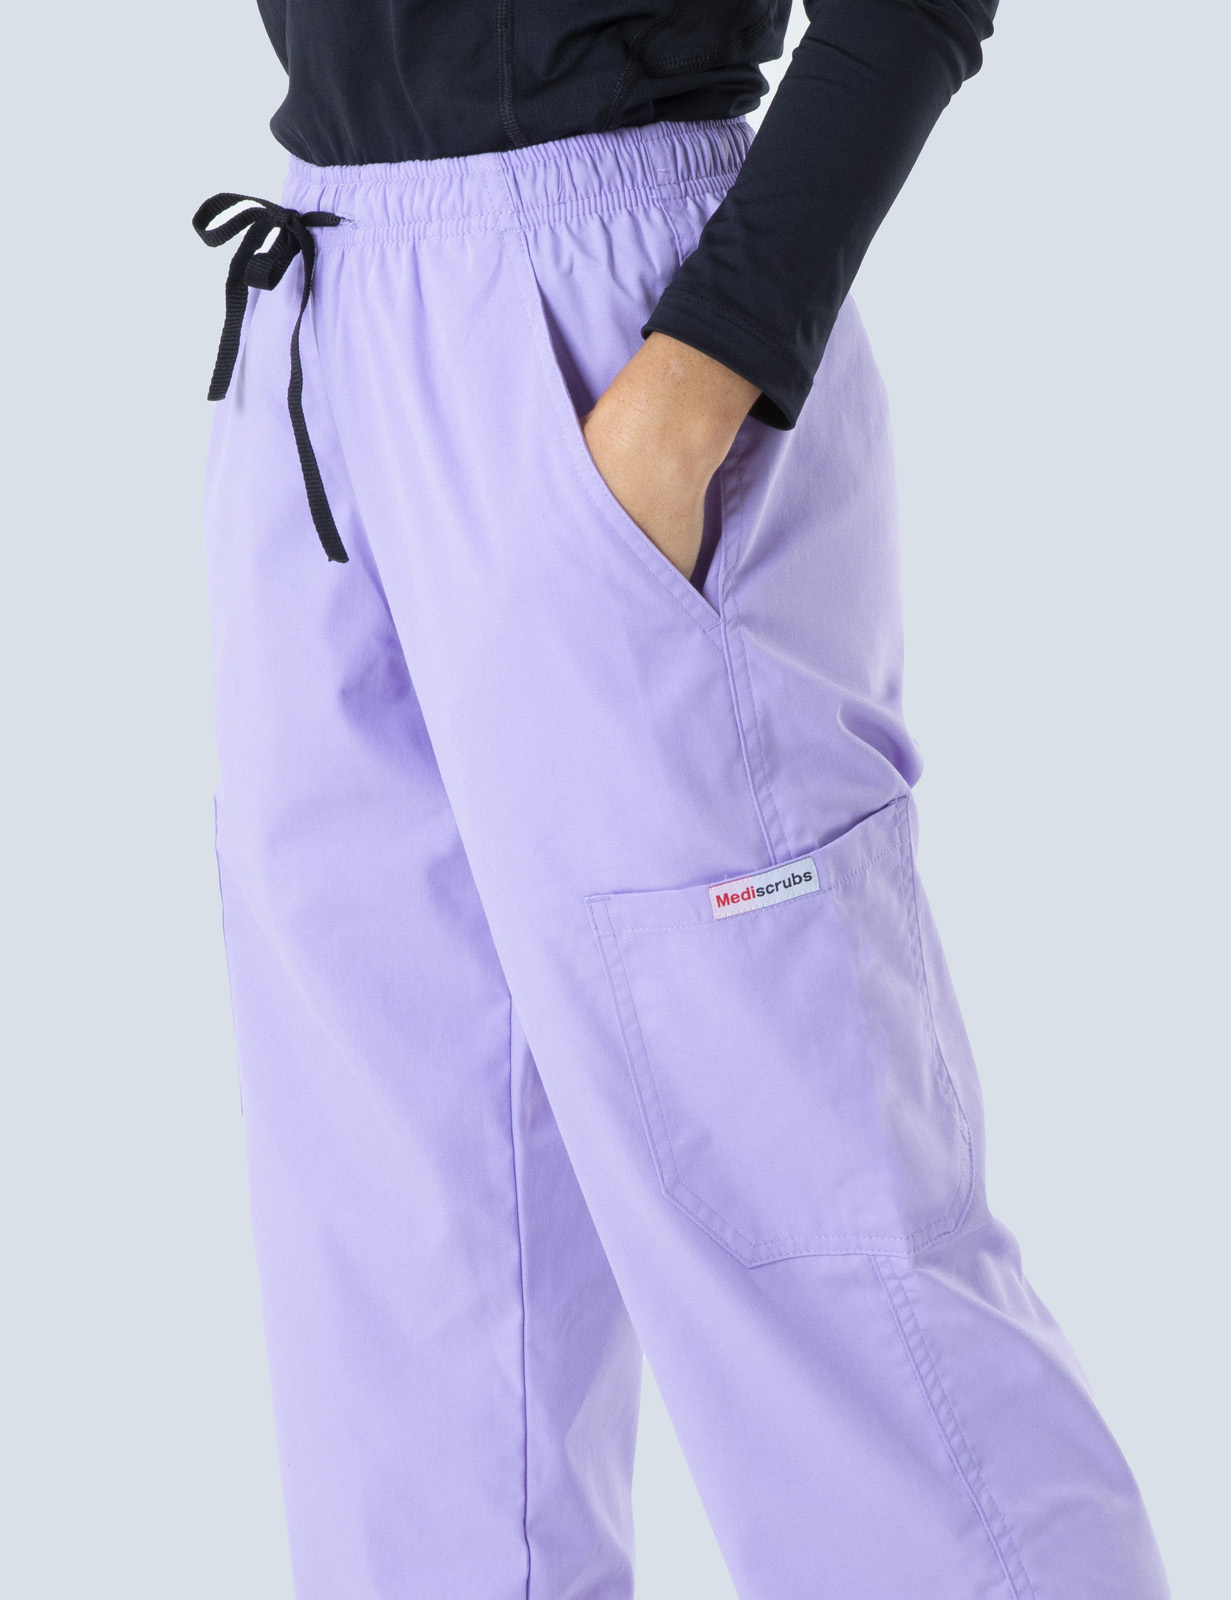 Women's Cargo Performance Pants - Lilac - 4X large - Tall - 0